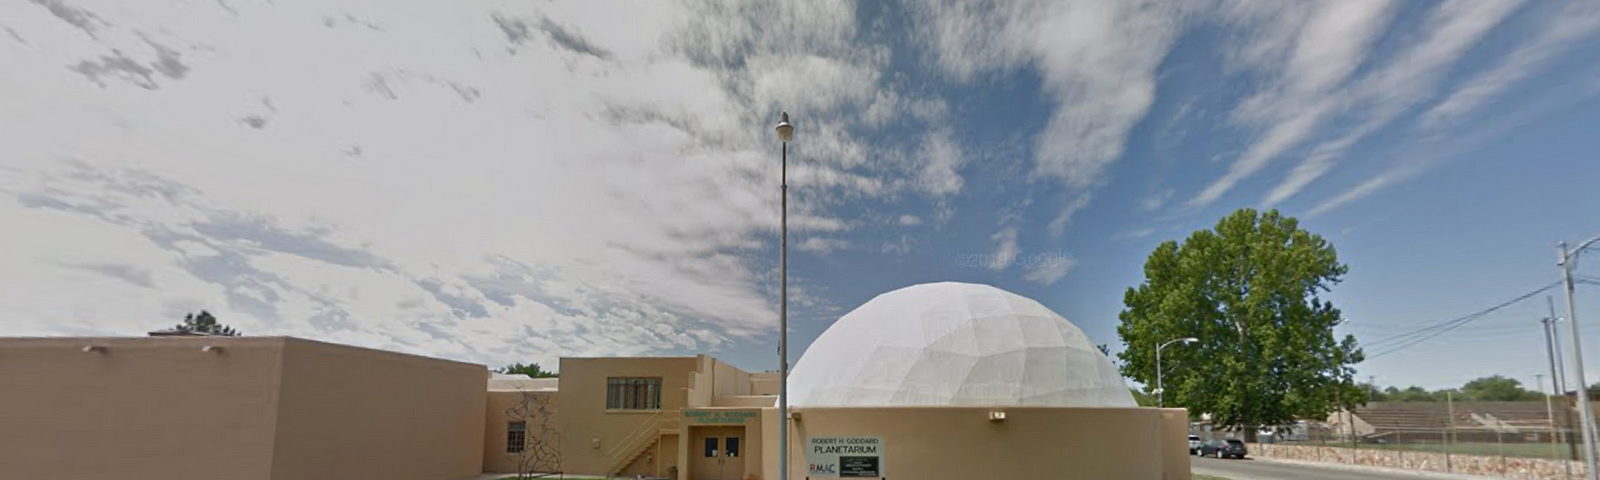 The Robert H. Goddard Planetarium in Roswell, New Mexico